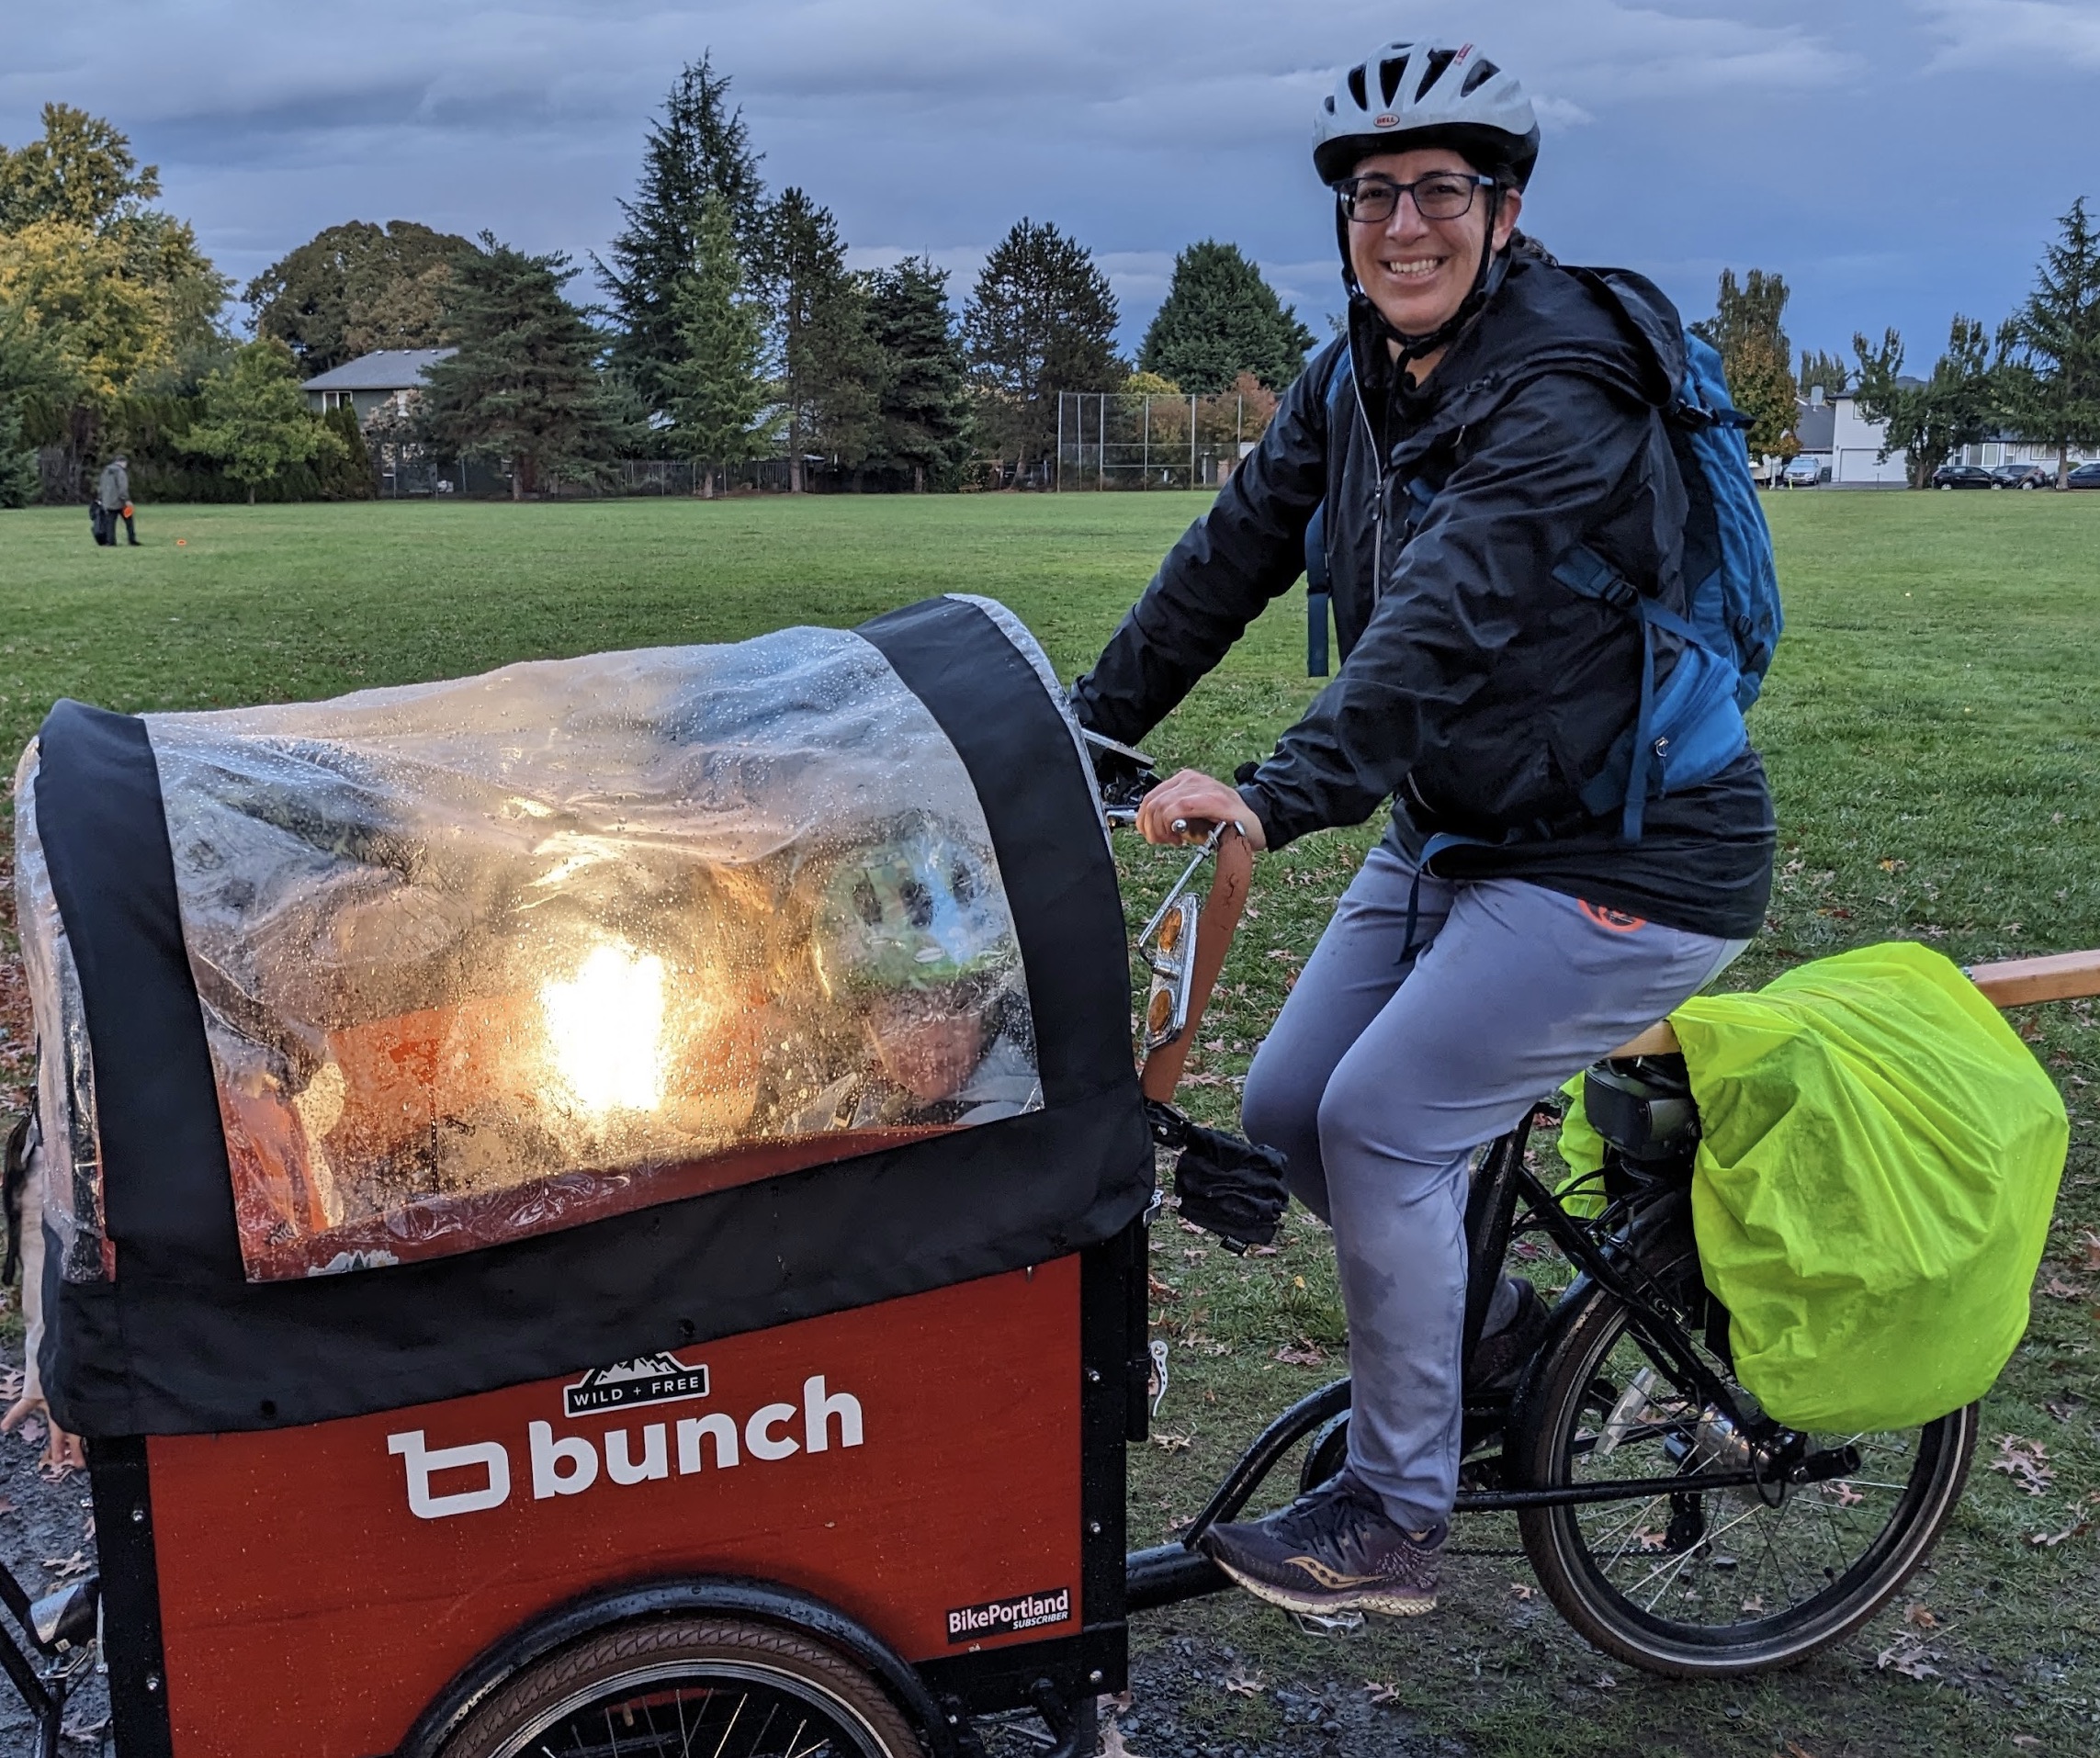 I was ready to ride in the rain, until it rained – BikePortland